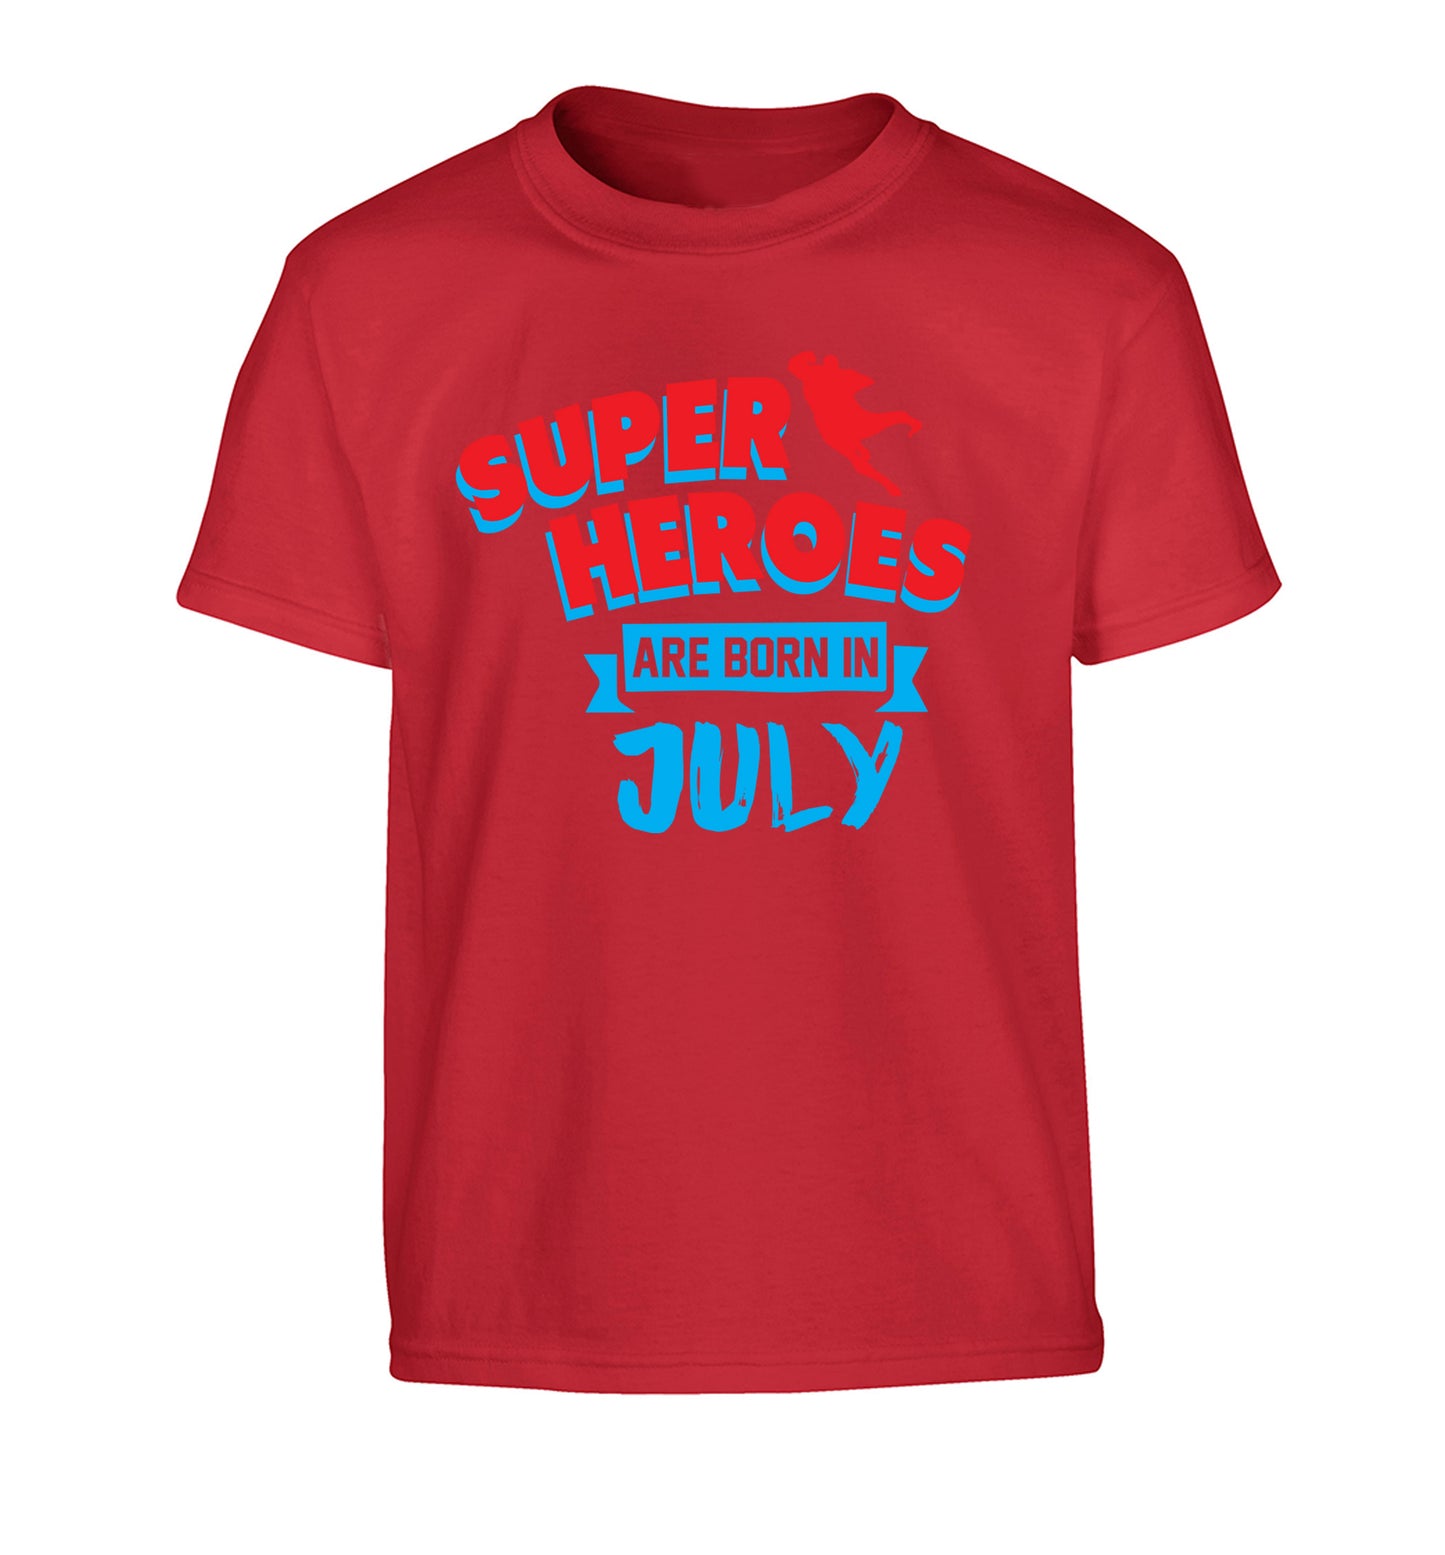 Superheroes are born in July Children's red Tshirt 12-13 Years